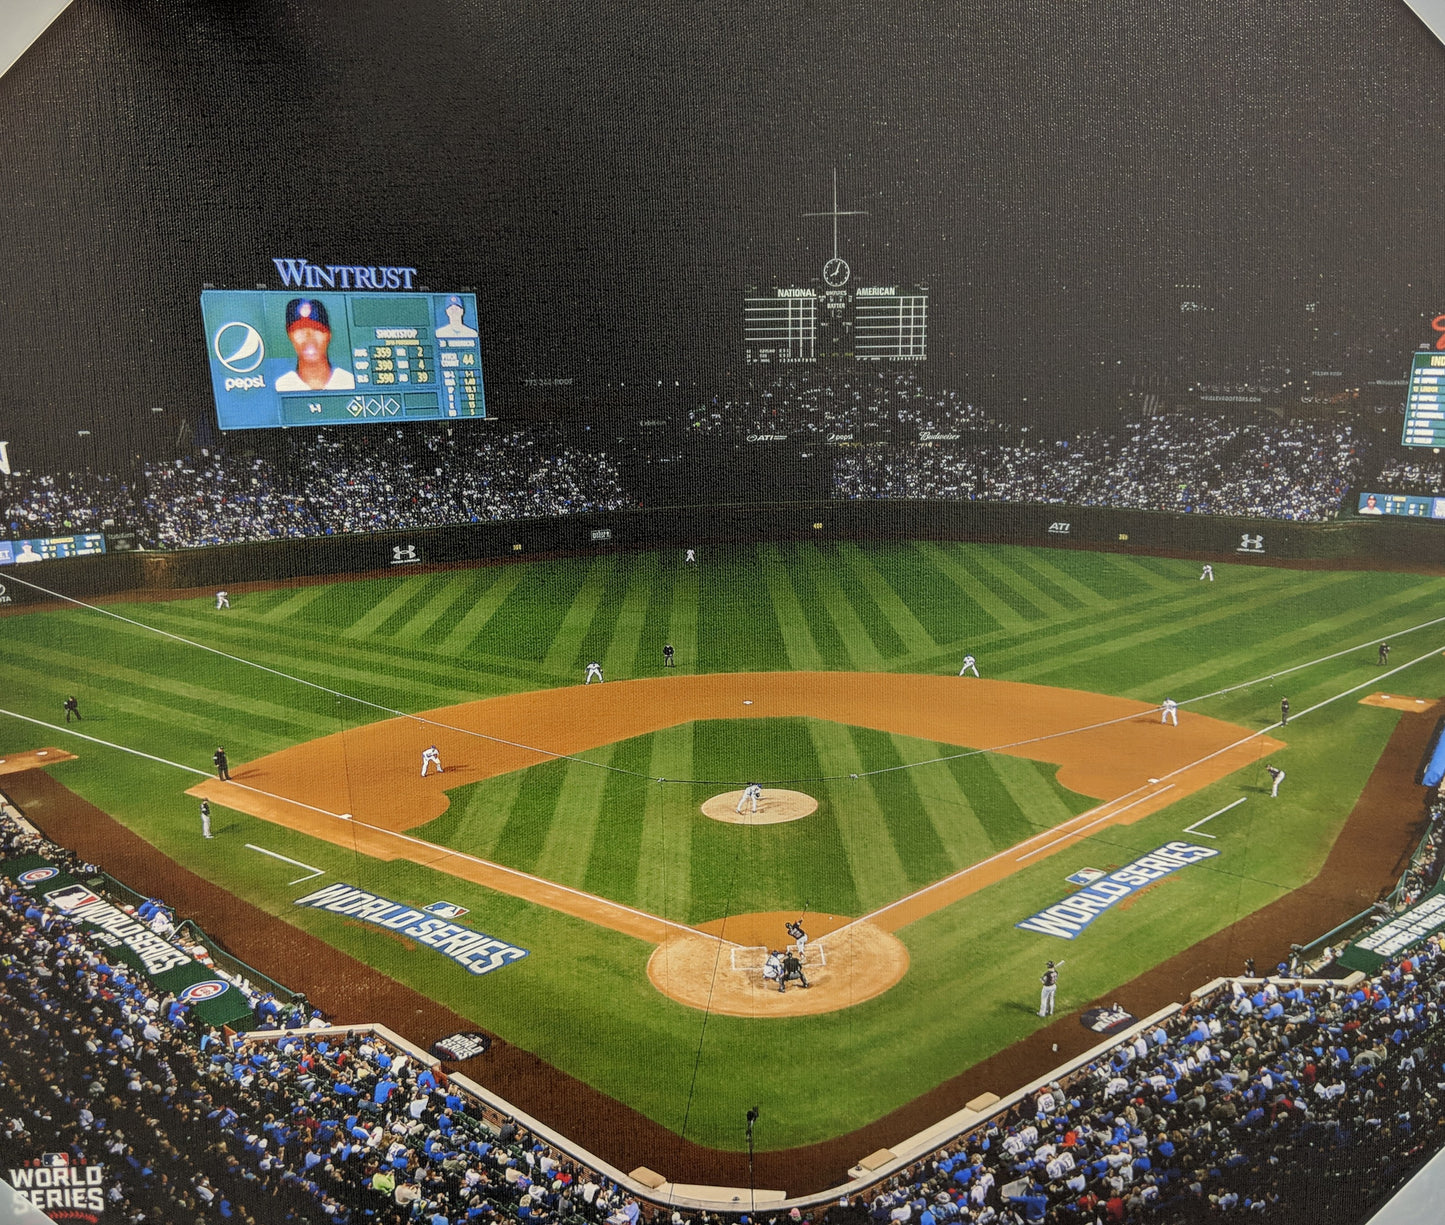 Chicago Cubs Wrigley Field 2016 World Series Game 3 Field Shot 20X24 Canvas Photo